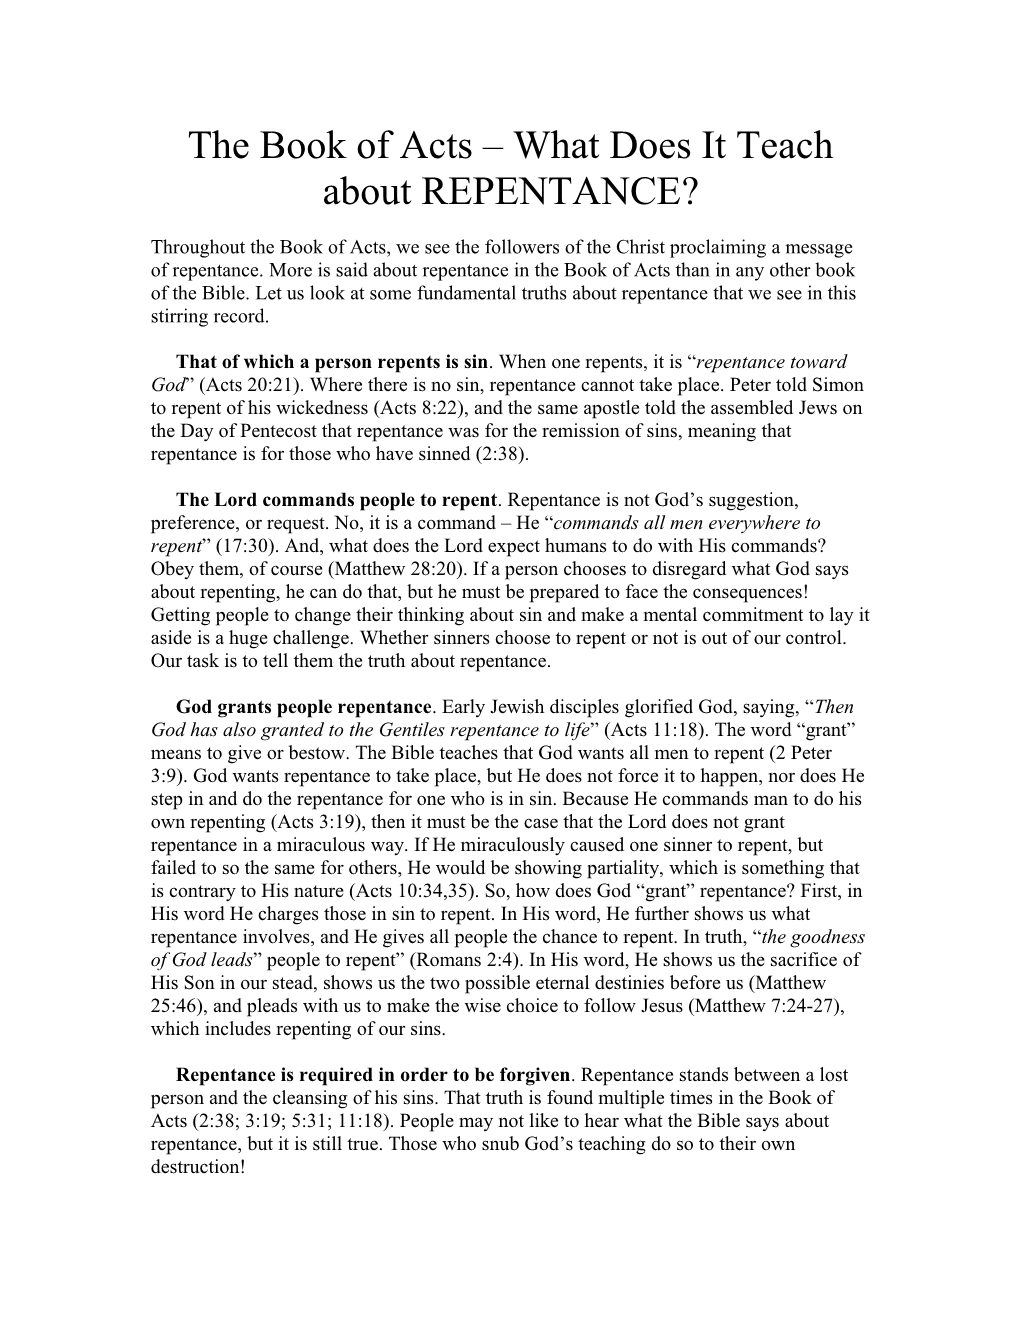 The Book of Acts What Does It Teach About REPENTANCE